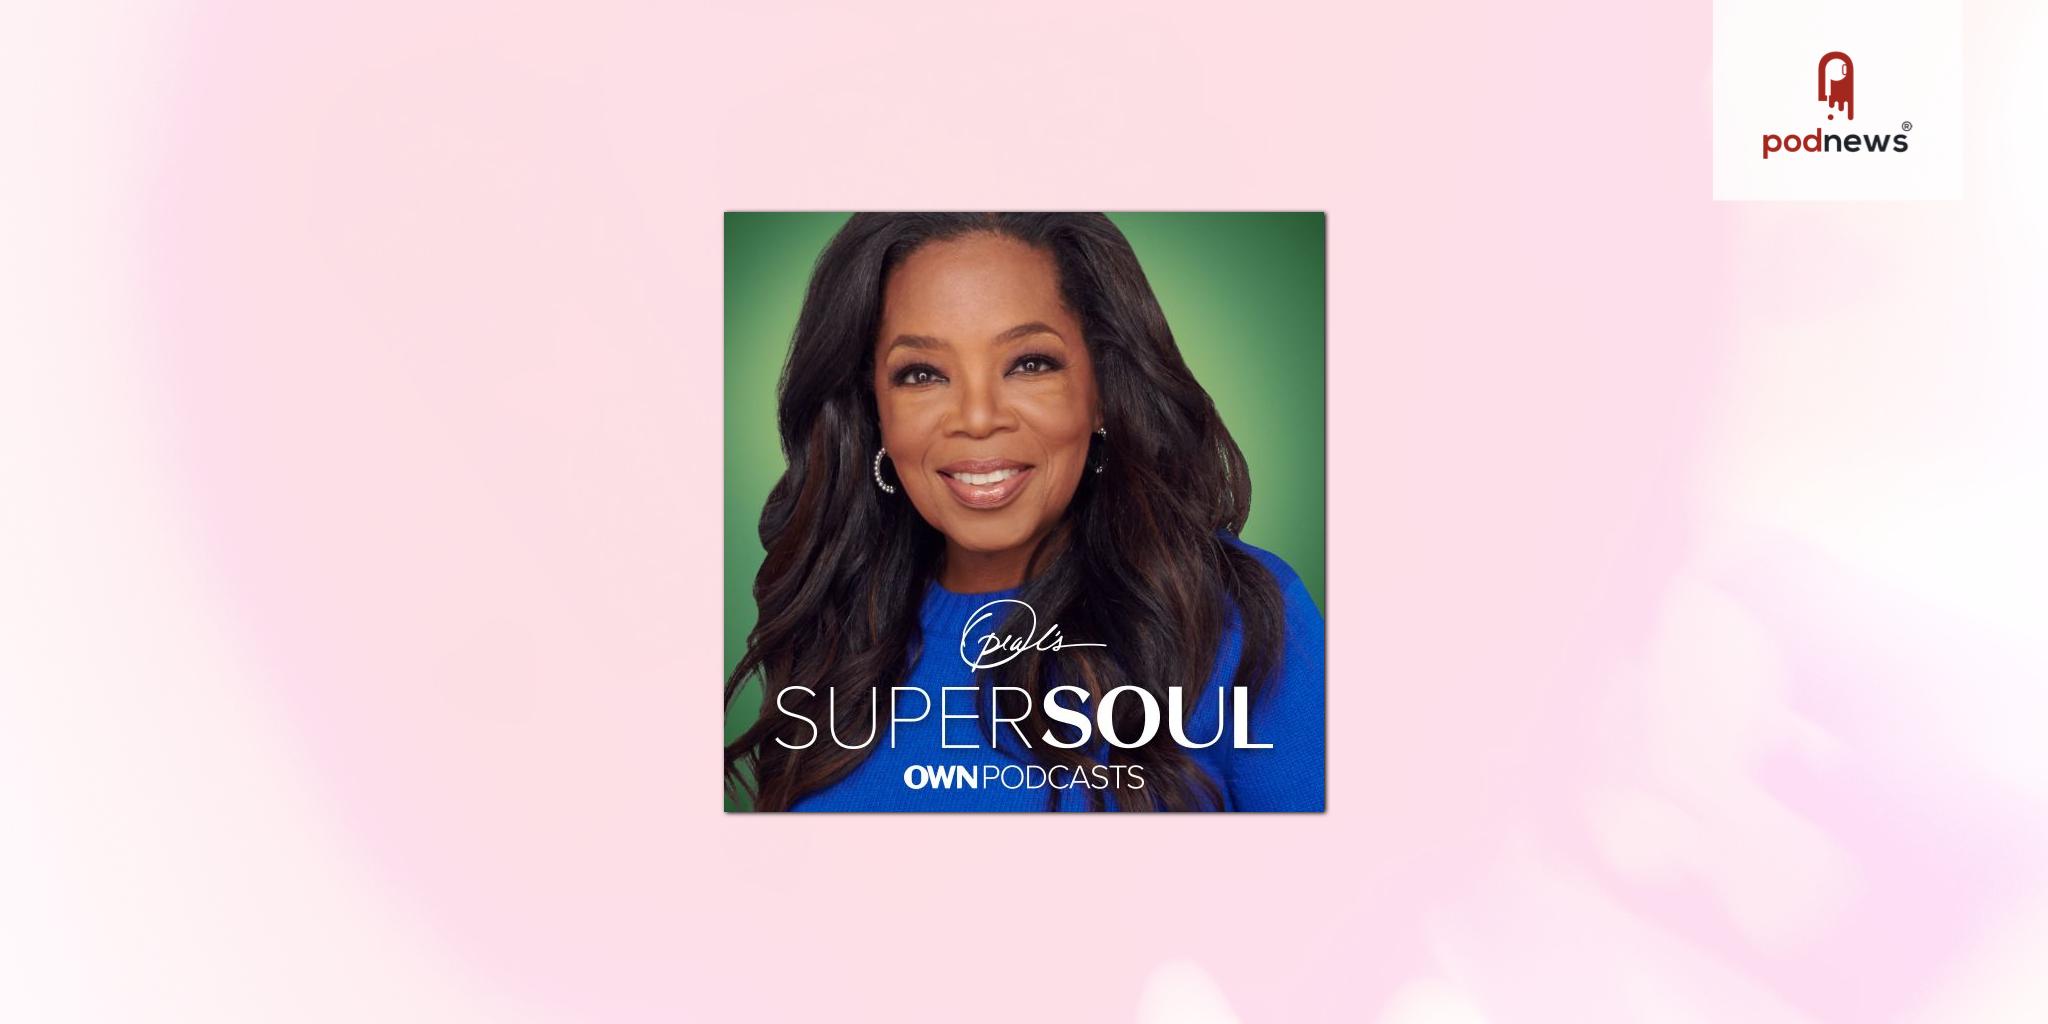 Oprah Winfrey Network - OWN - Signs Renewal Agreement to Keep Its Slate of Podcasts with SiriusXM